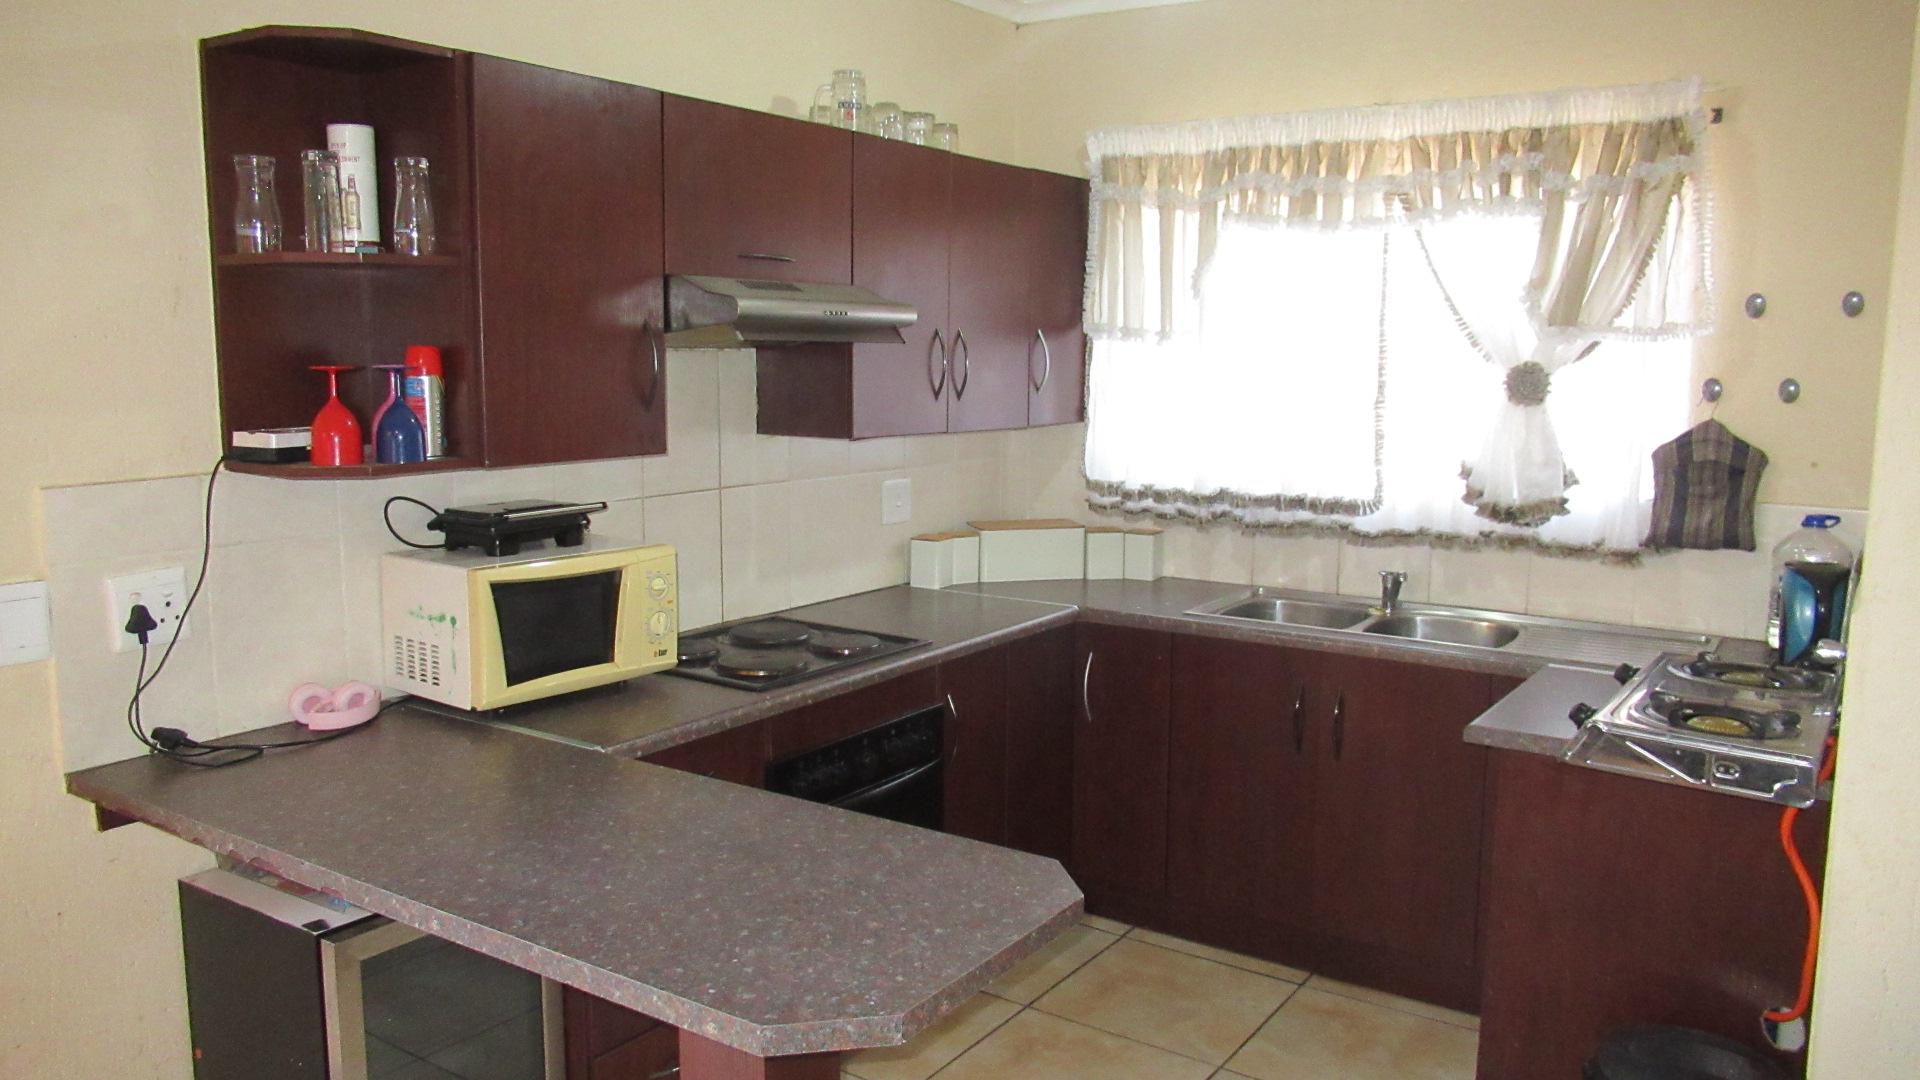 Kitchen - 8 square meters of property in Greenhills